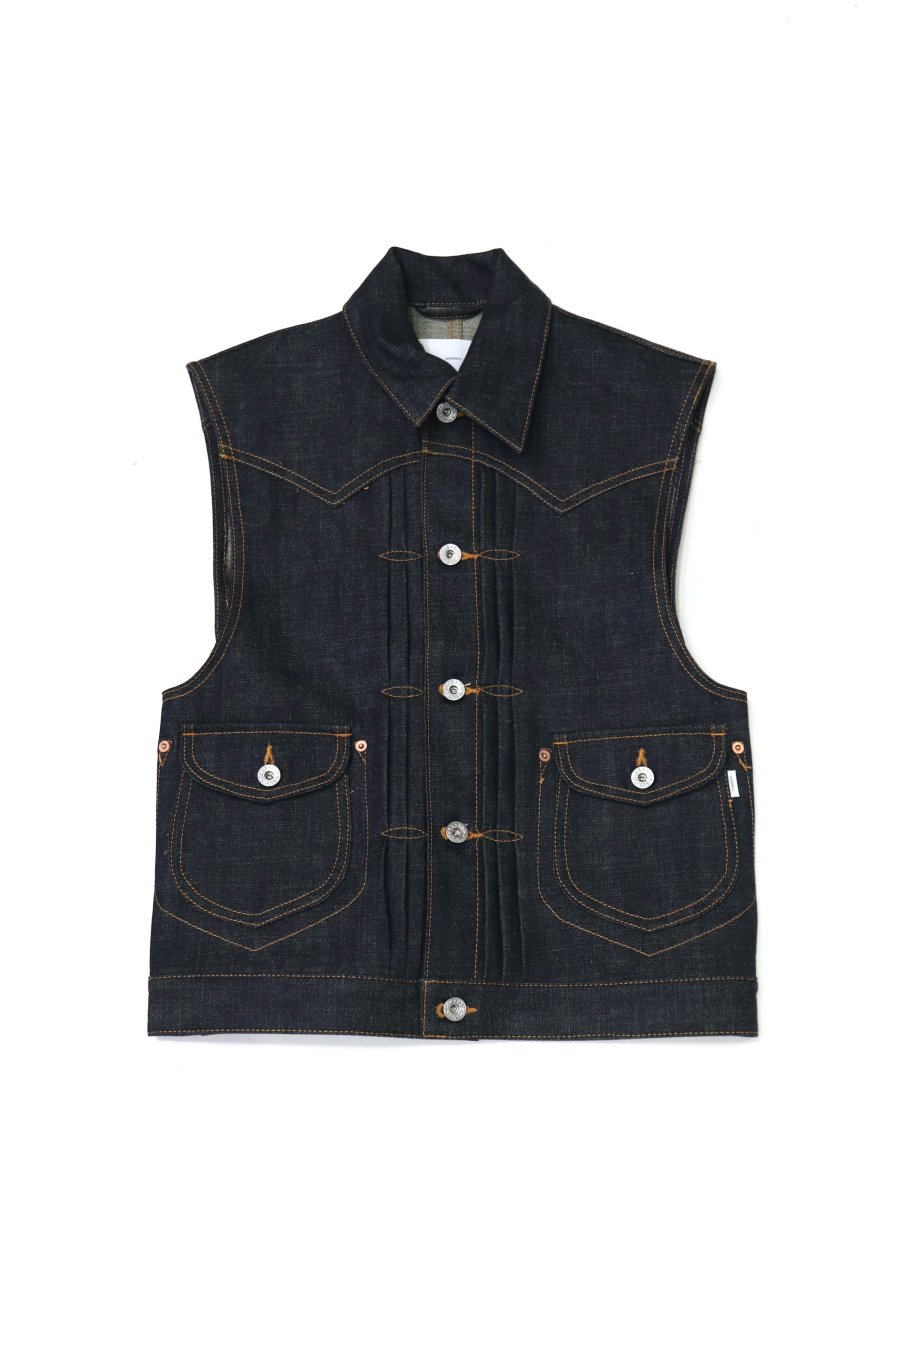 SUGARHILL  CLASSIC DENIM VEST<img class='new_mark_img2' src='https://img.shop-pro.jp/img/new/icons15.gif' style='border:none;display:inline;margin:0px;padding:0px;width:auto;' />